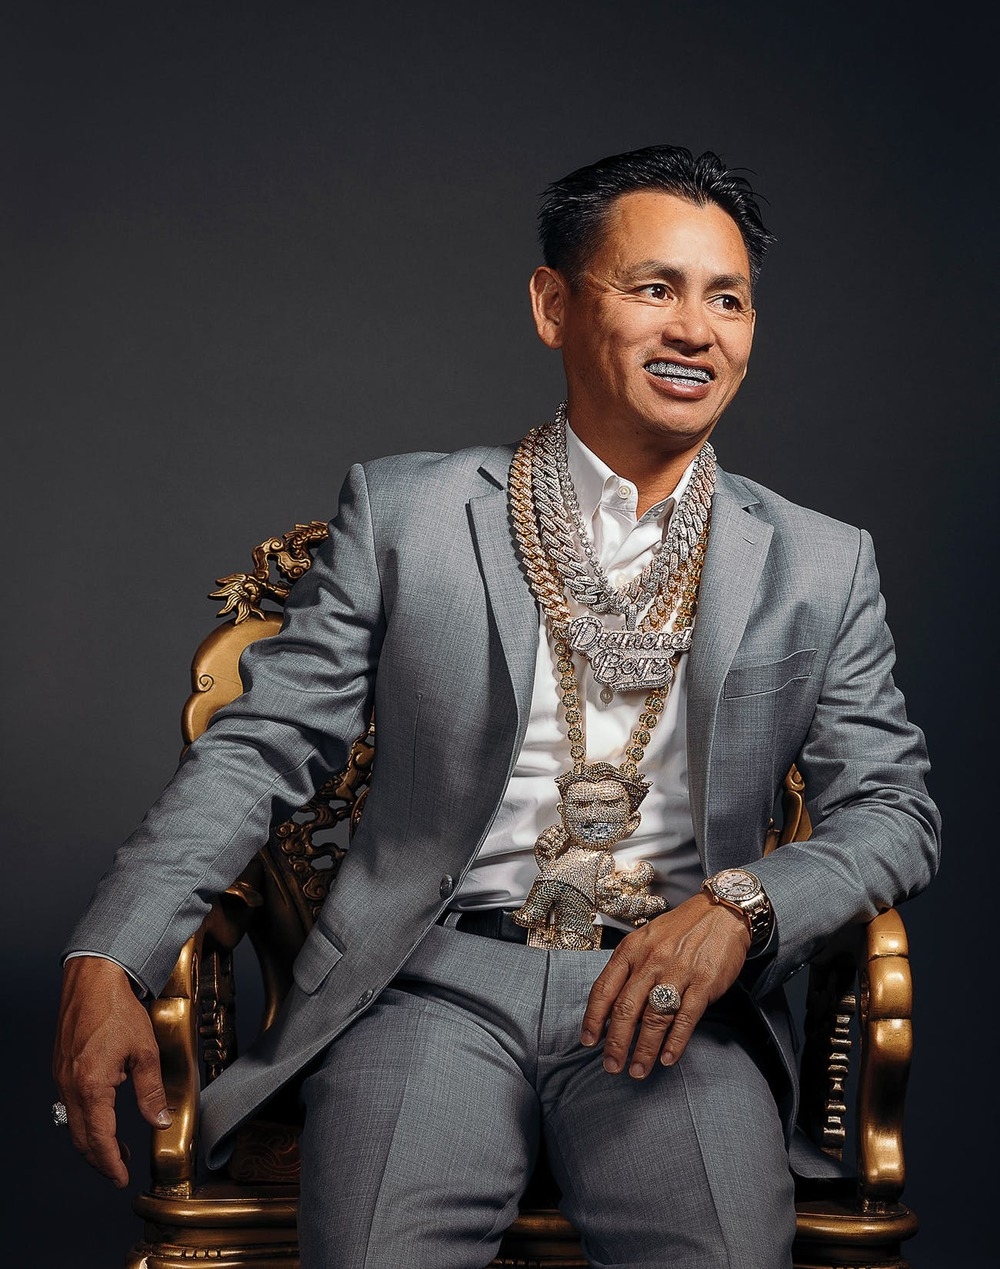 Who Is Johnny Dang – Vietnamese Jeweler Behind Success Of American Rappers?